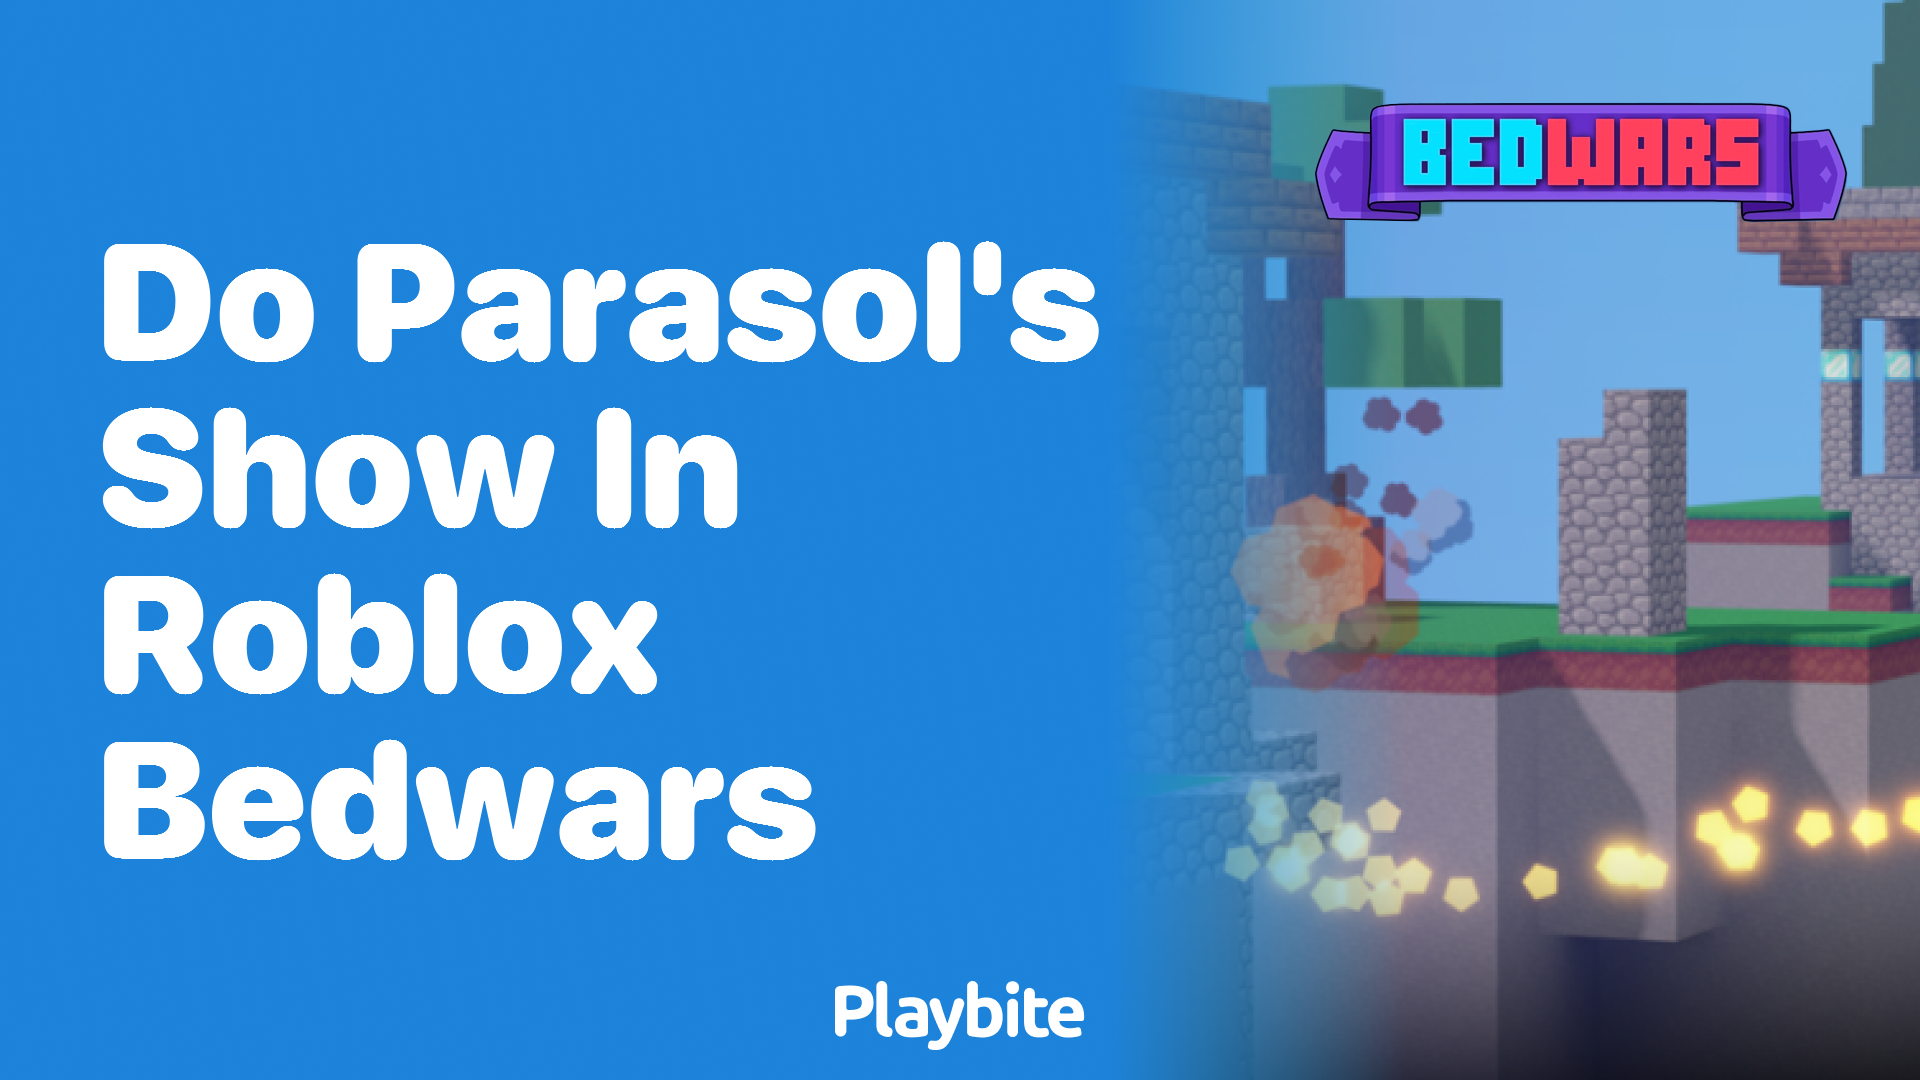 Do Parasols Show in Roblox Bedwars?